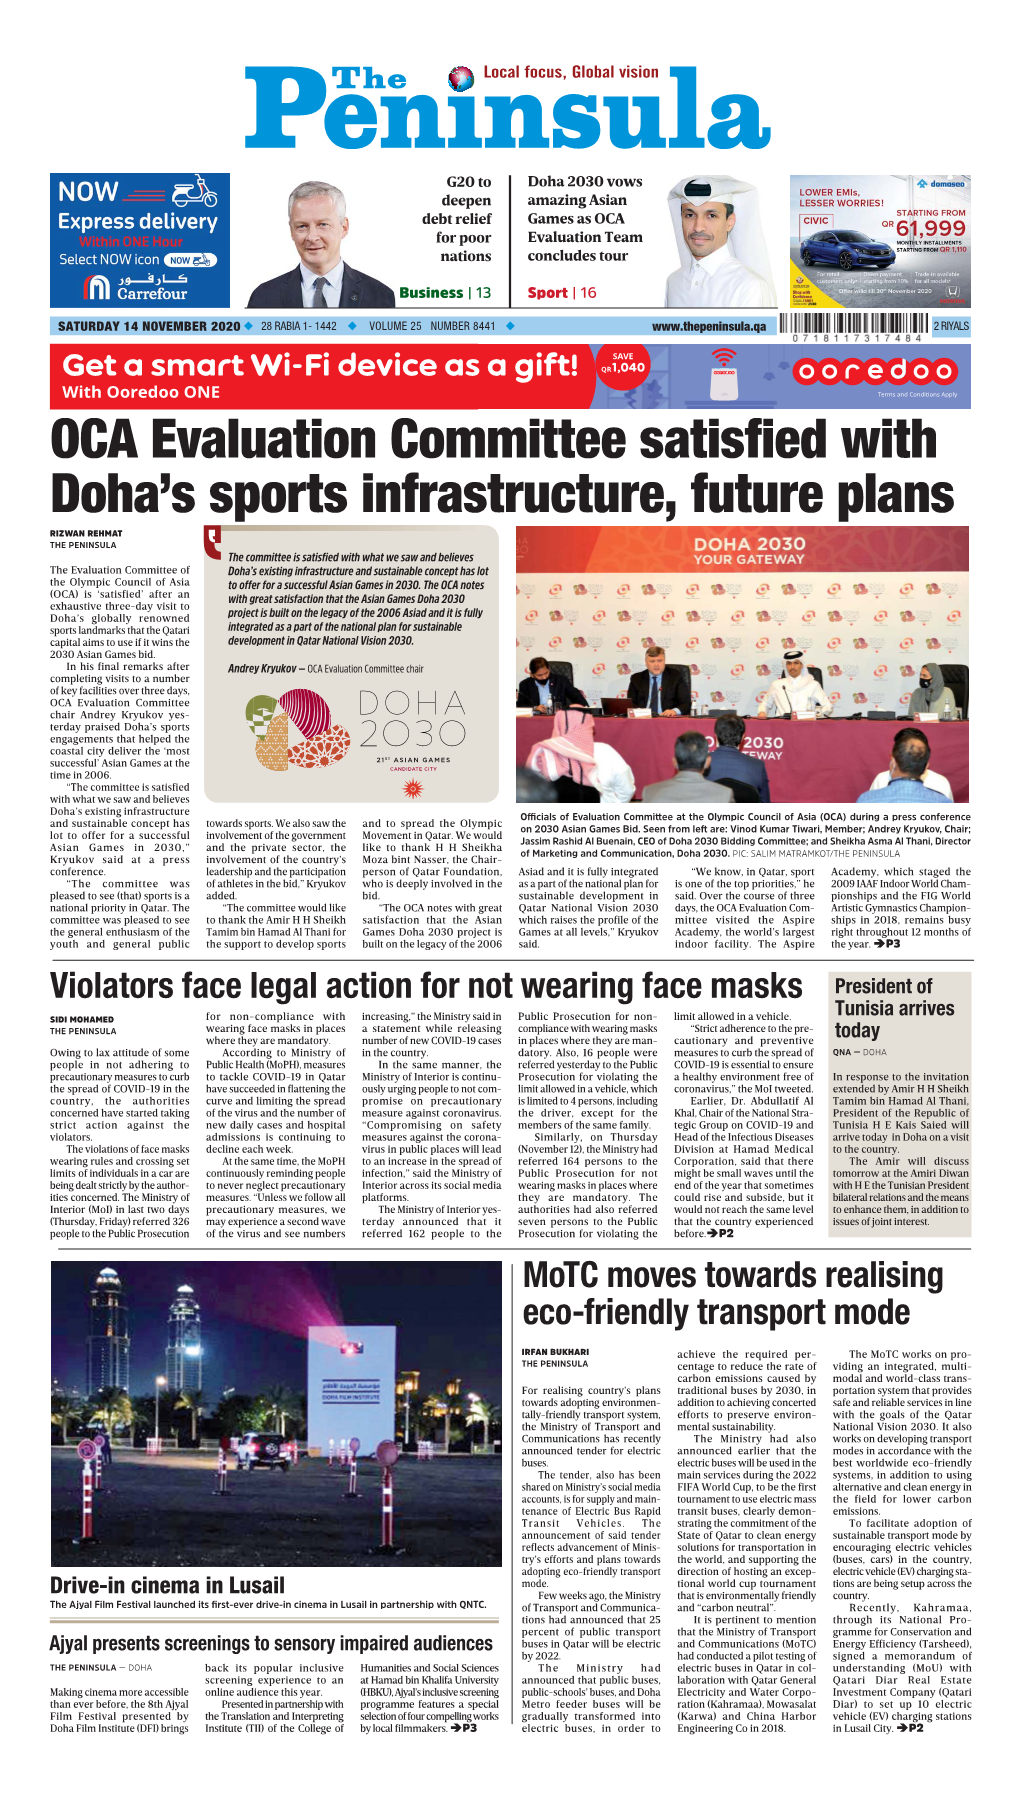 OCA Evaluation Committee Satisfied with Doha's Sports Infrastructure